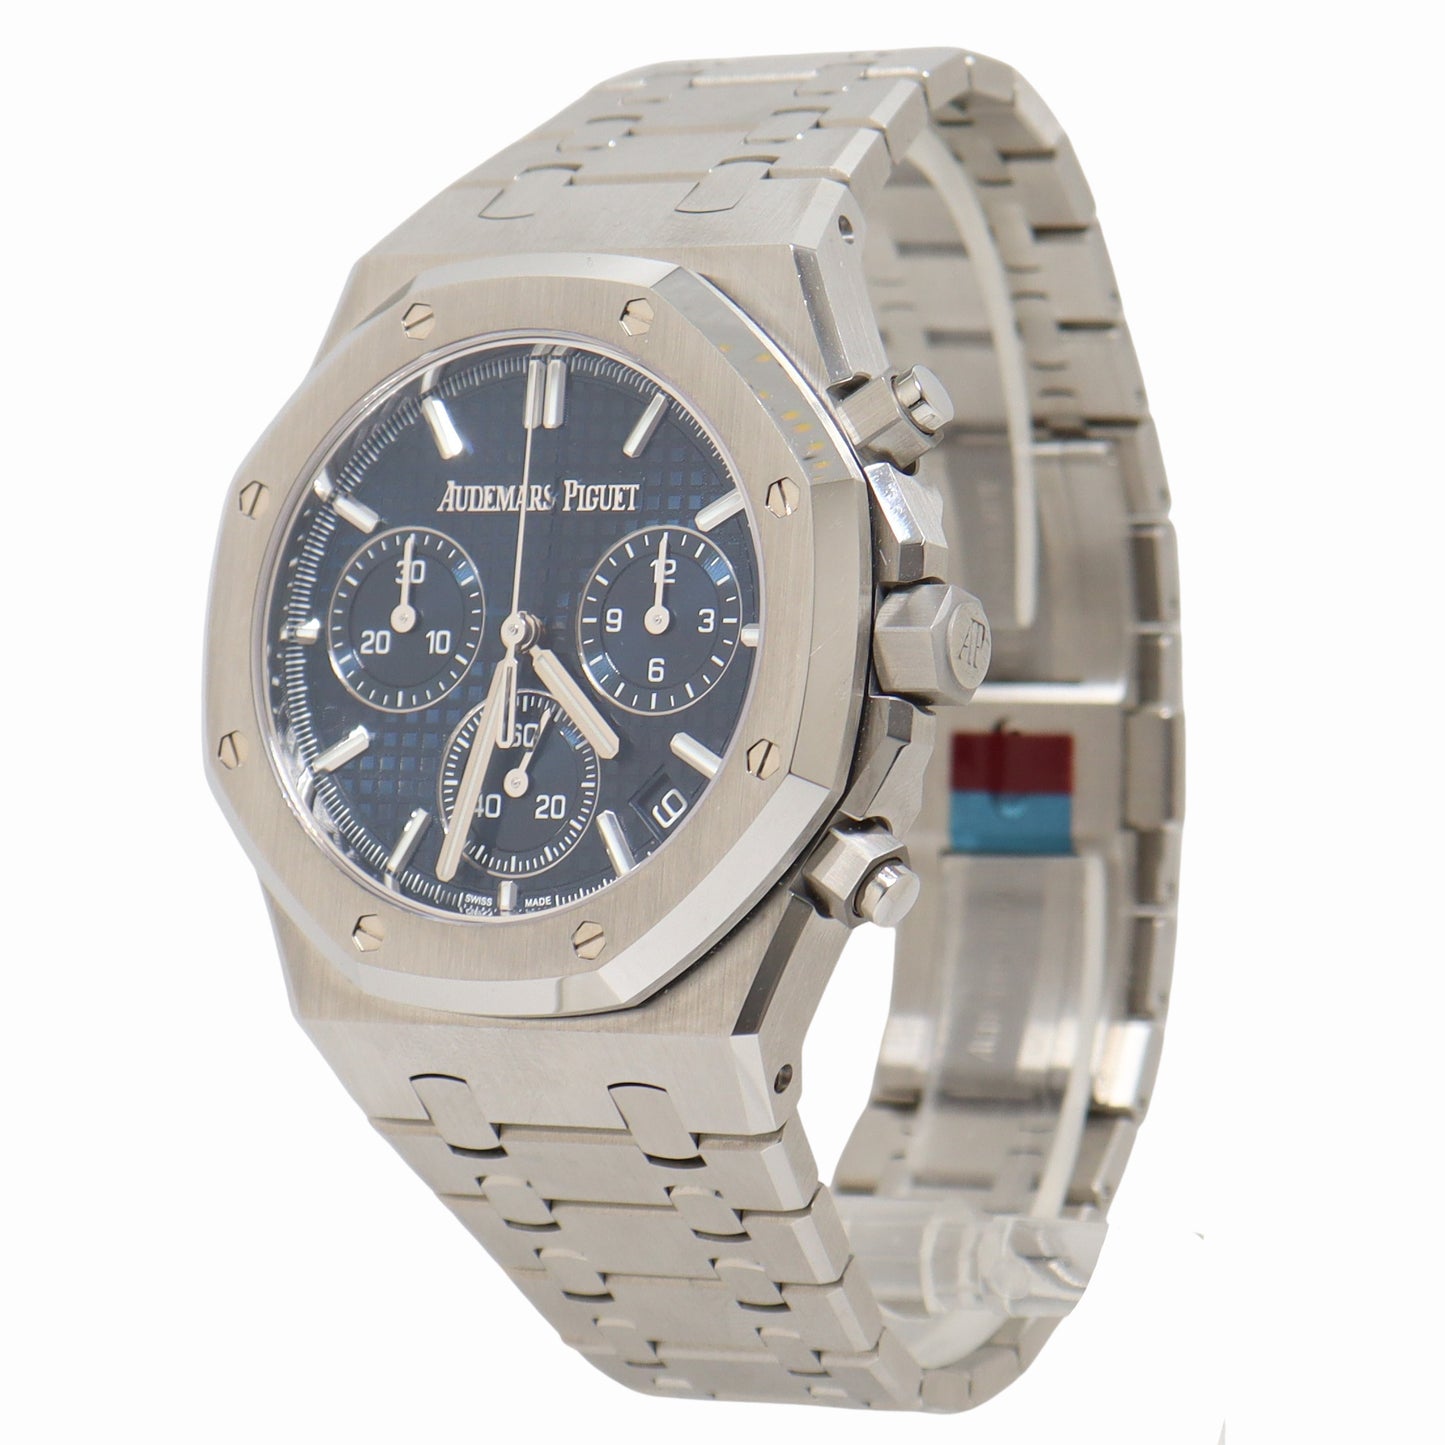 Audemars Piguet Royal Oak 50th Anniversary Stainless Steel 41mm Blue Chronograph "Grande Tapisserie" Dial Watch Reference# 26240ST.OO.1320ST.01 - Happy Jewelers Fine Jewelry Lifetime Warranty